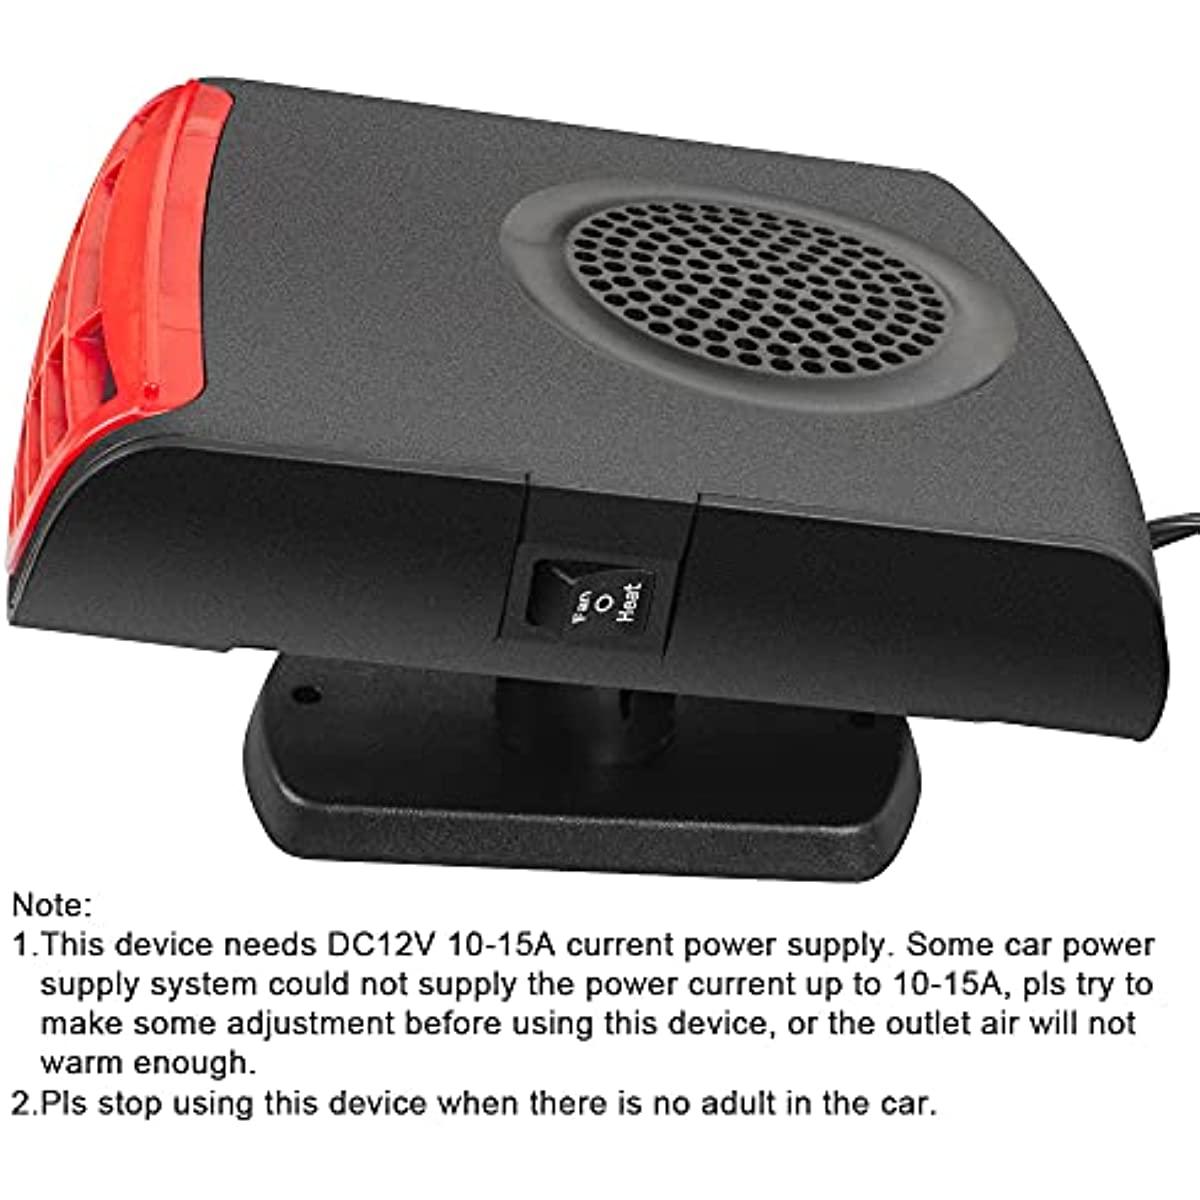 Portable Car Heater, 12V 150W Car Defroster Defogger, 3 In 1 Car Heater Heating & Cooling & Air Purify, Auto Defogger 360° Rotatable Fast Heating Quickly Defrost - KinglyDay